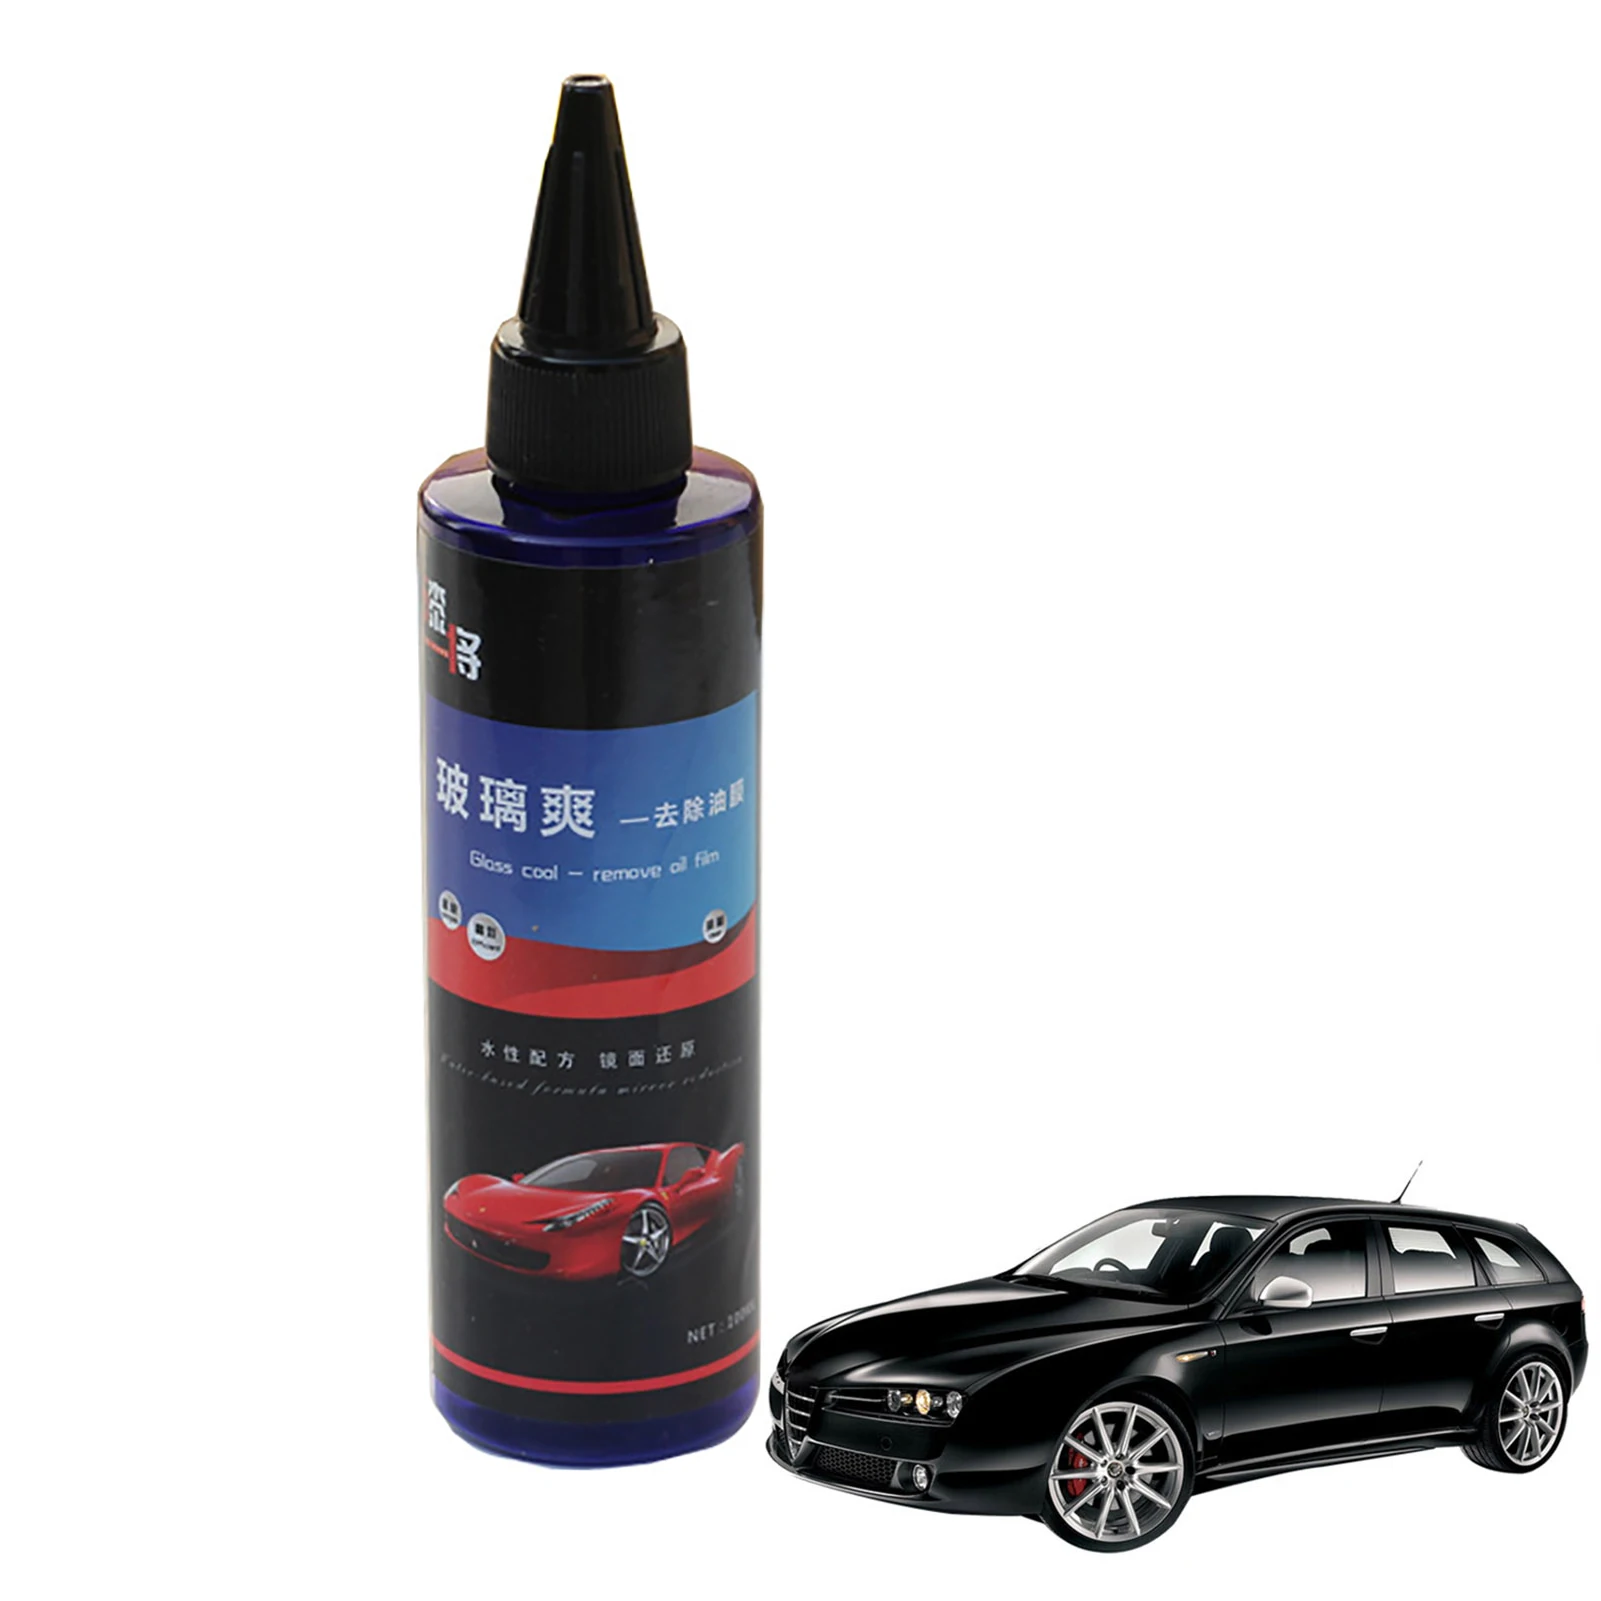 Car Glass Oily Film Cleaner Waterproof Windshield Cleaner Deep-Cleaning Hydrophobic Coating Rain Proof For Windscreen Mirror